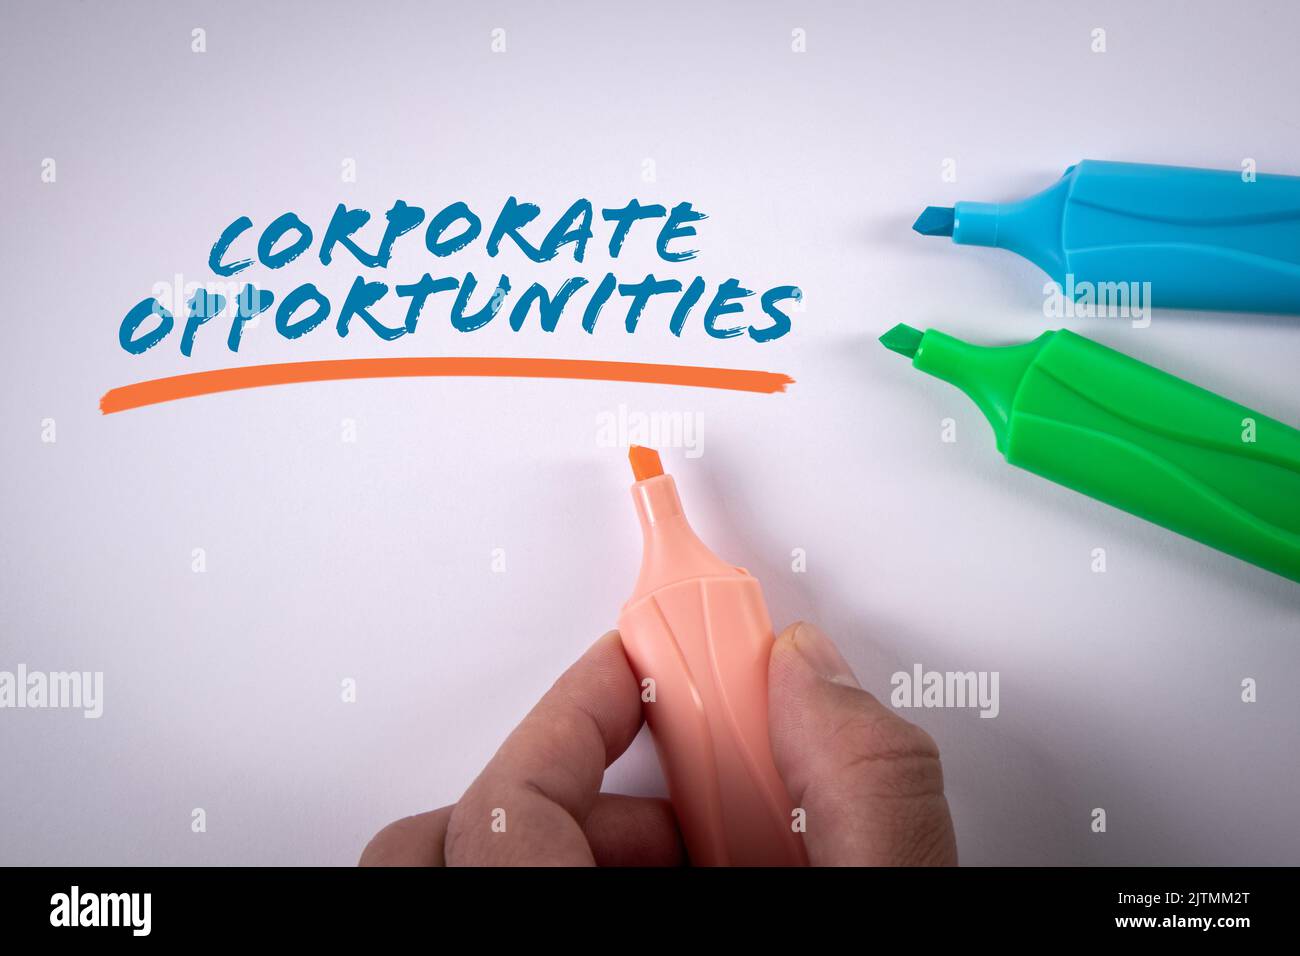 CORPORATE OPPORTUNITIES. Colored markers on a white background. Stock Photo